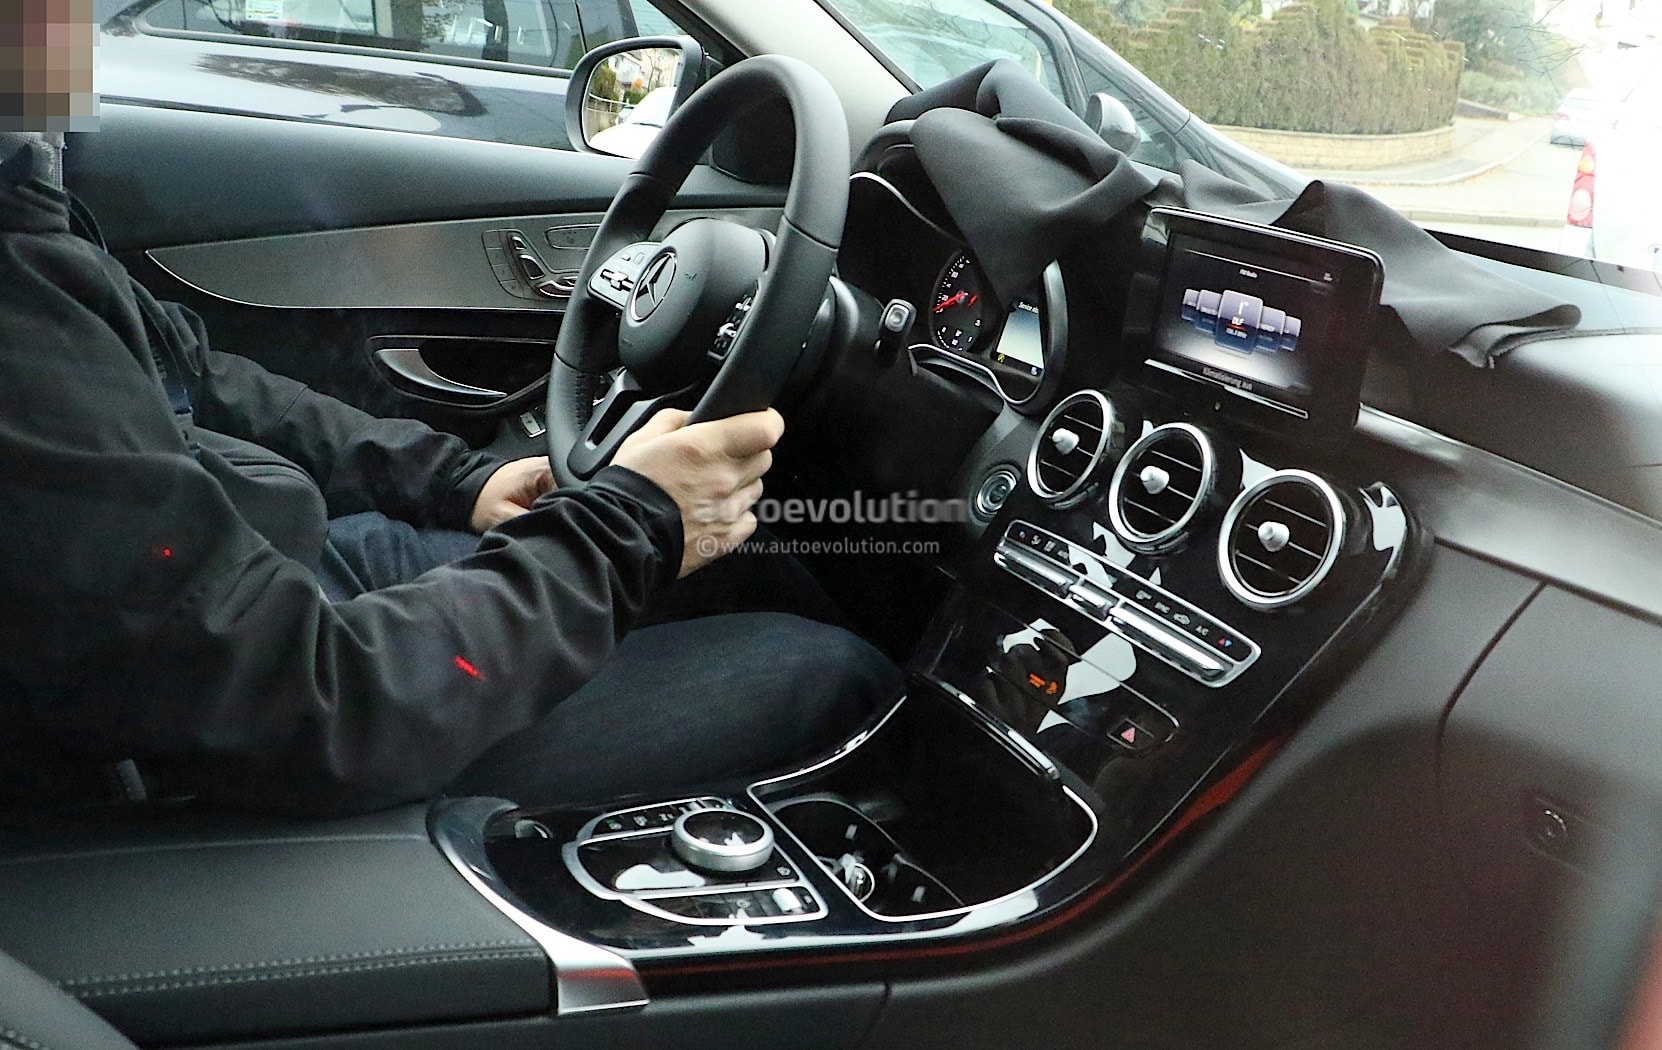 2018 mercedes benz c class facelift shows interior for the first time 113176_1